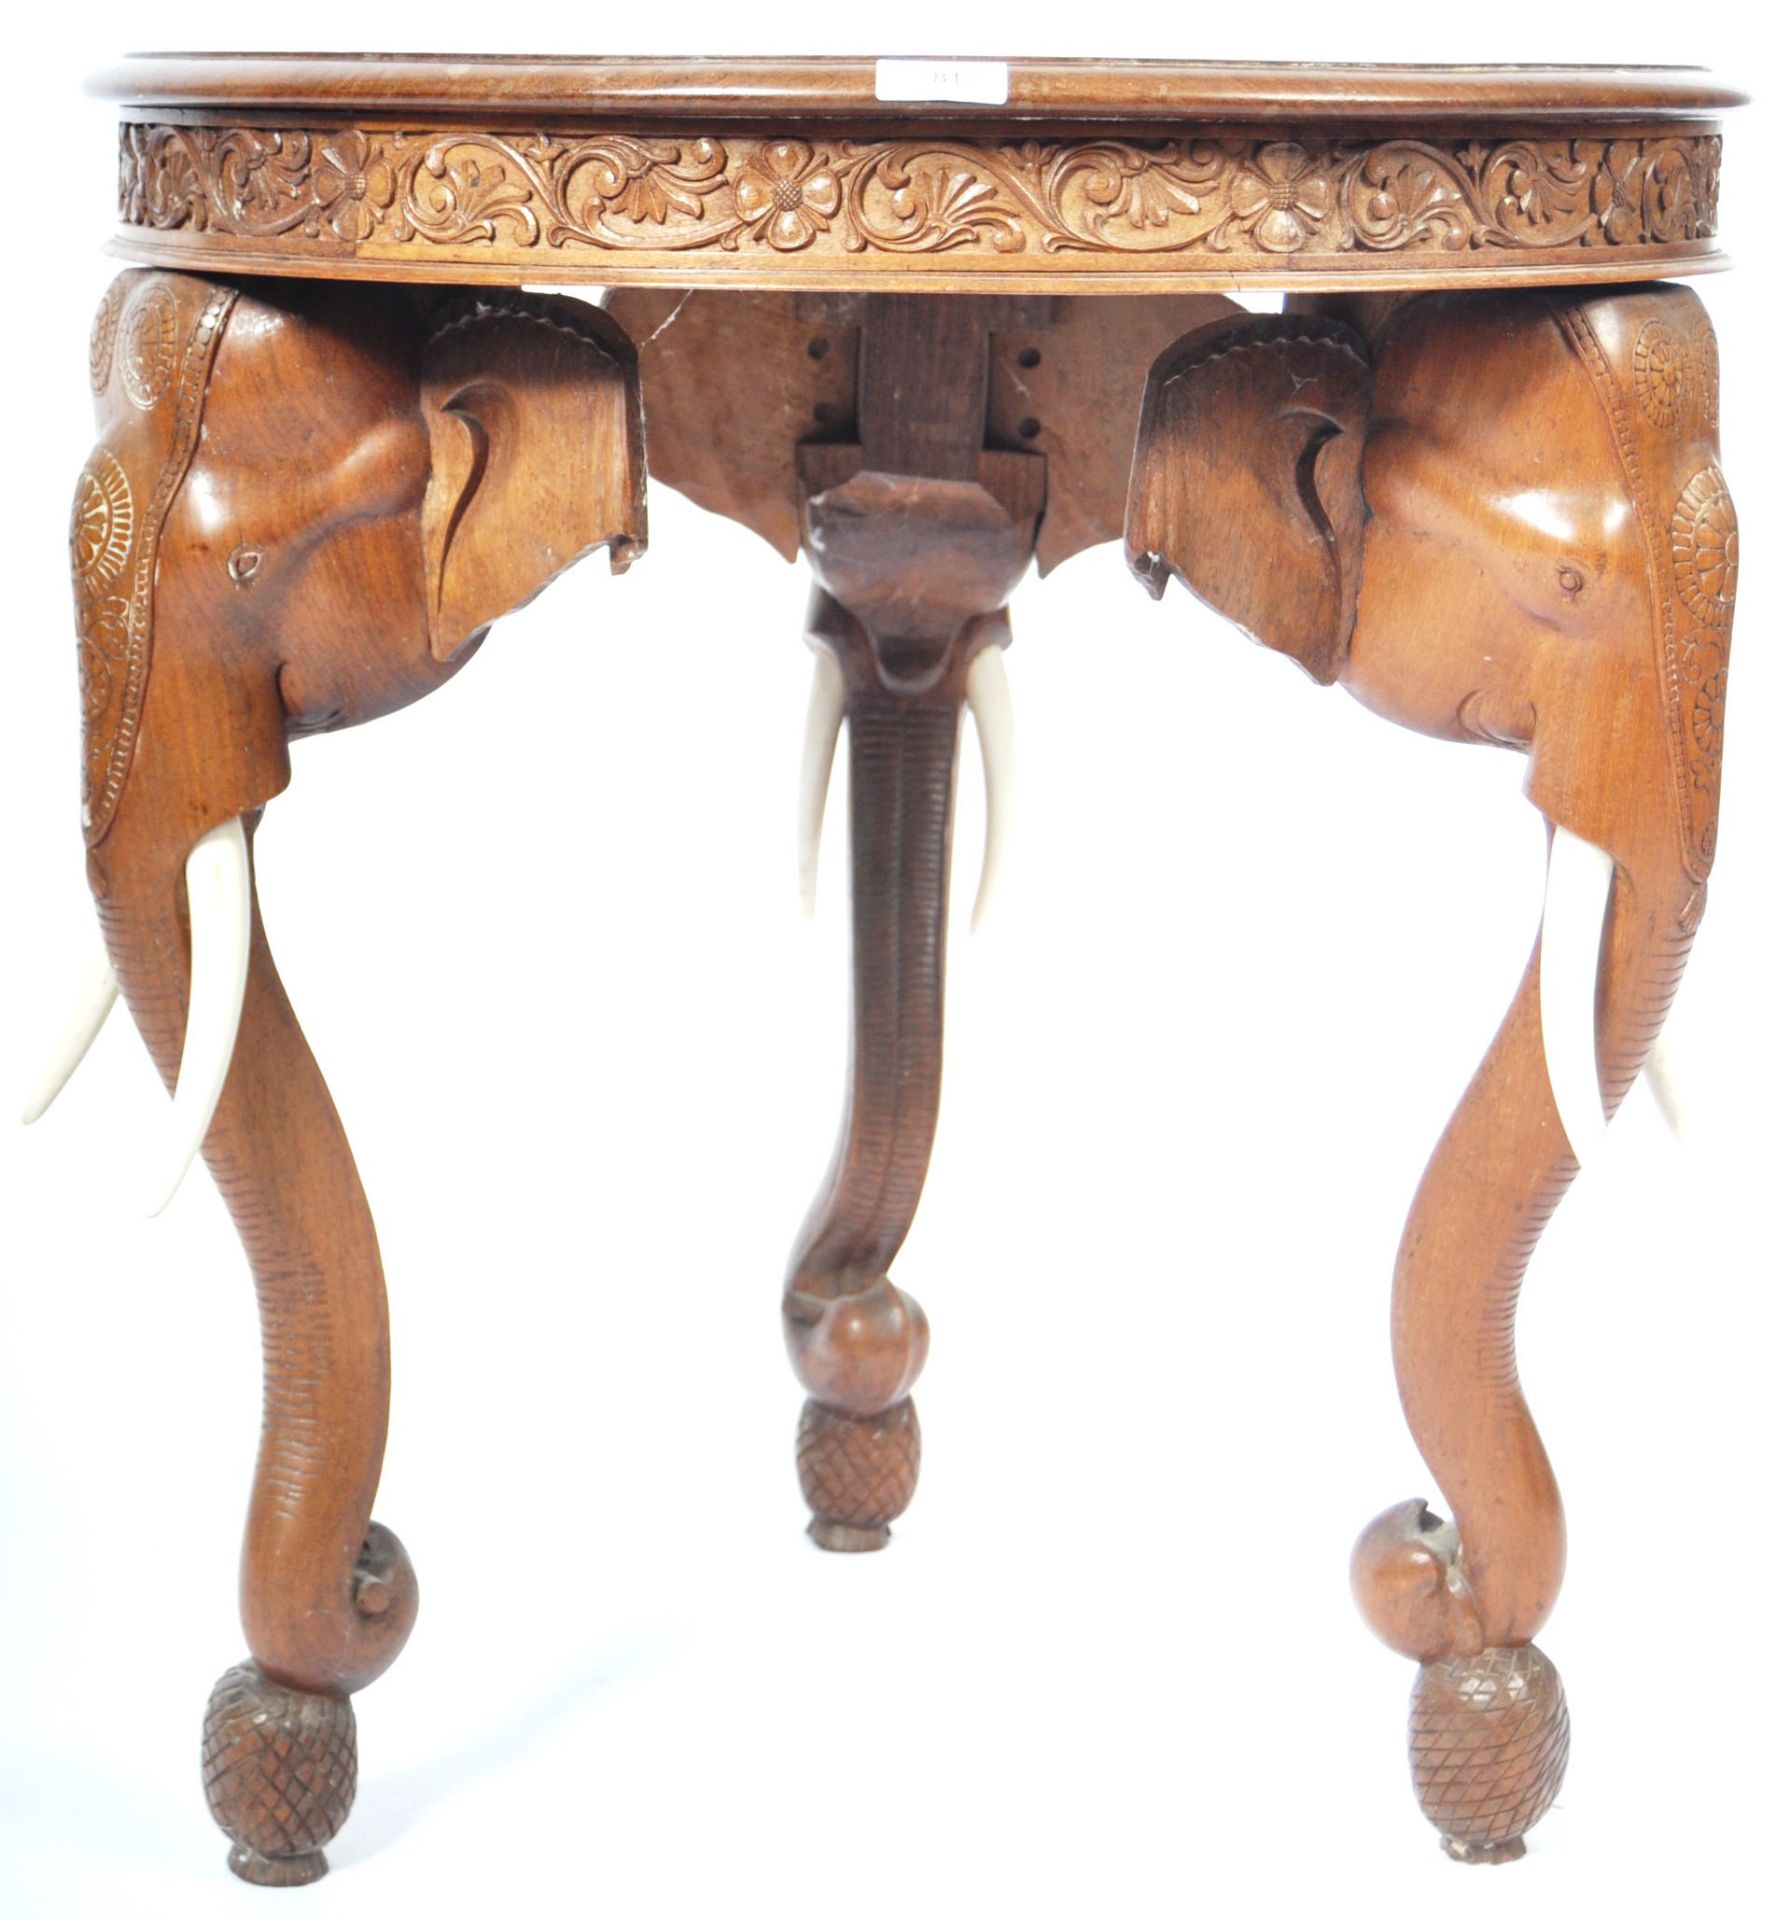 EARLY 20TH CENTURY ANGLO-INDIAN INLAID ELEPHANT OCCASIONAL TABLE